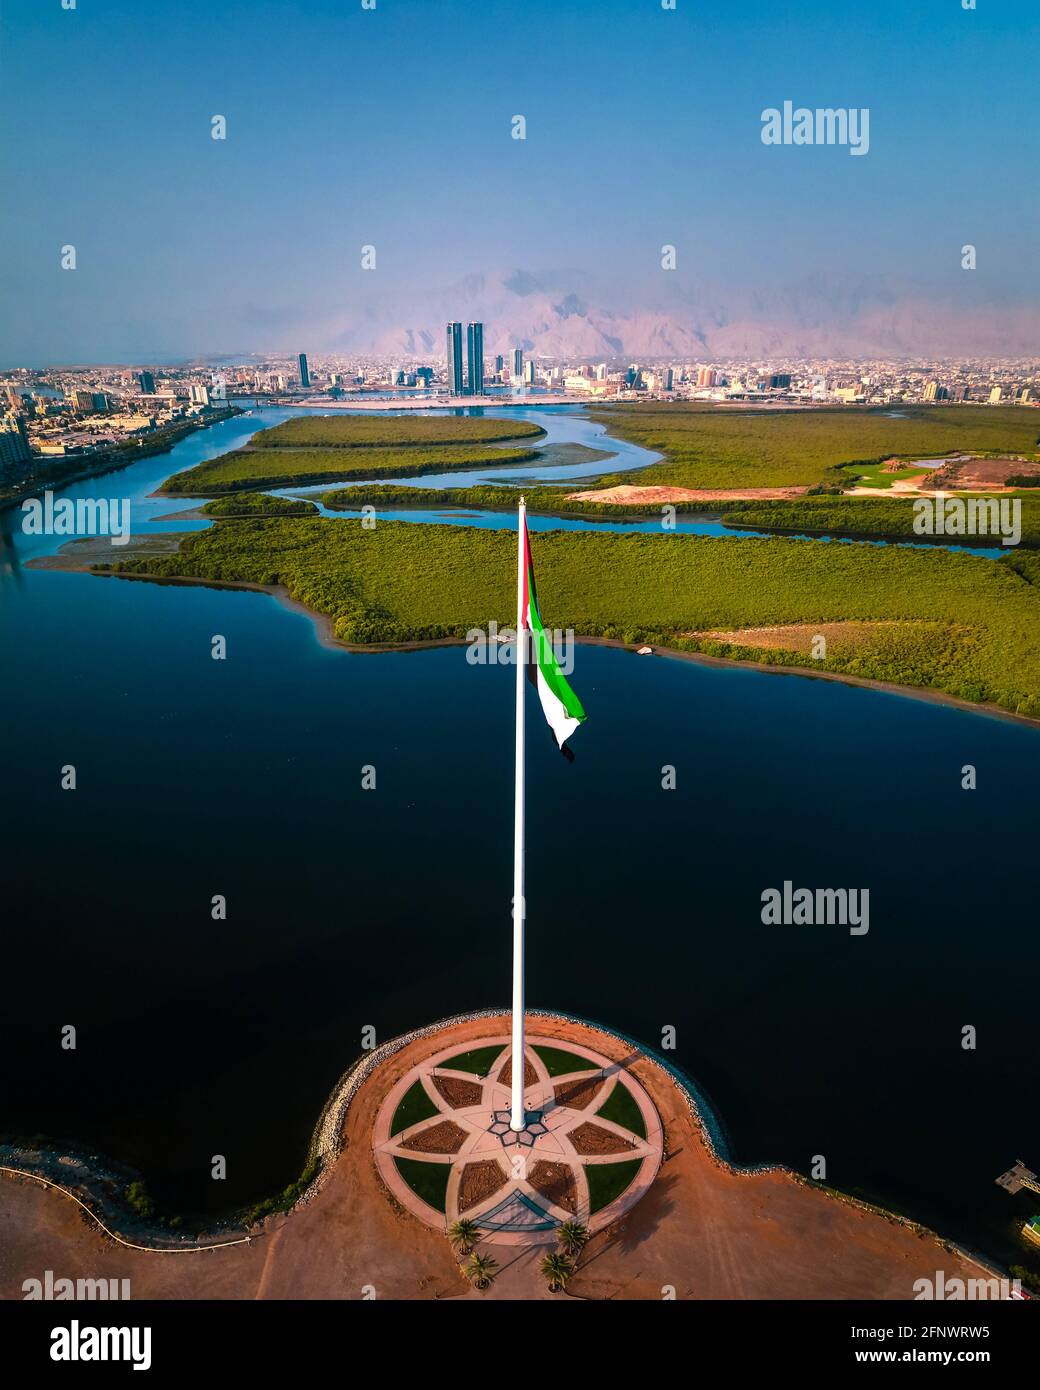 UAE national flag pole and Ras al Khaimah emirate in the northern United Arab Emirates aerial skyline landmark and skyline view above the mangroves an Stock Photo